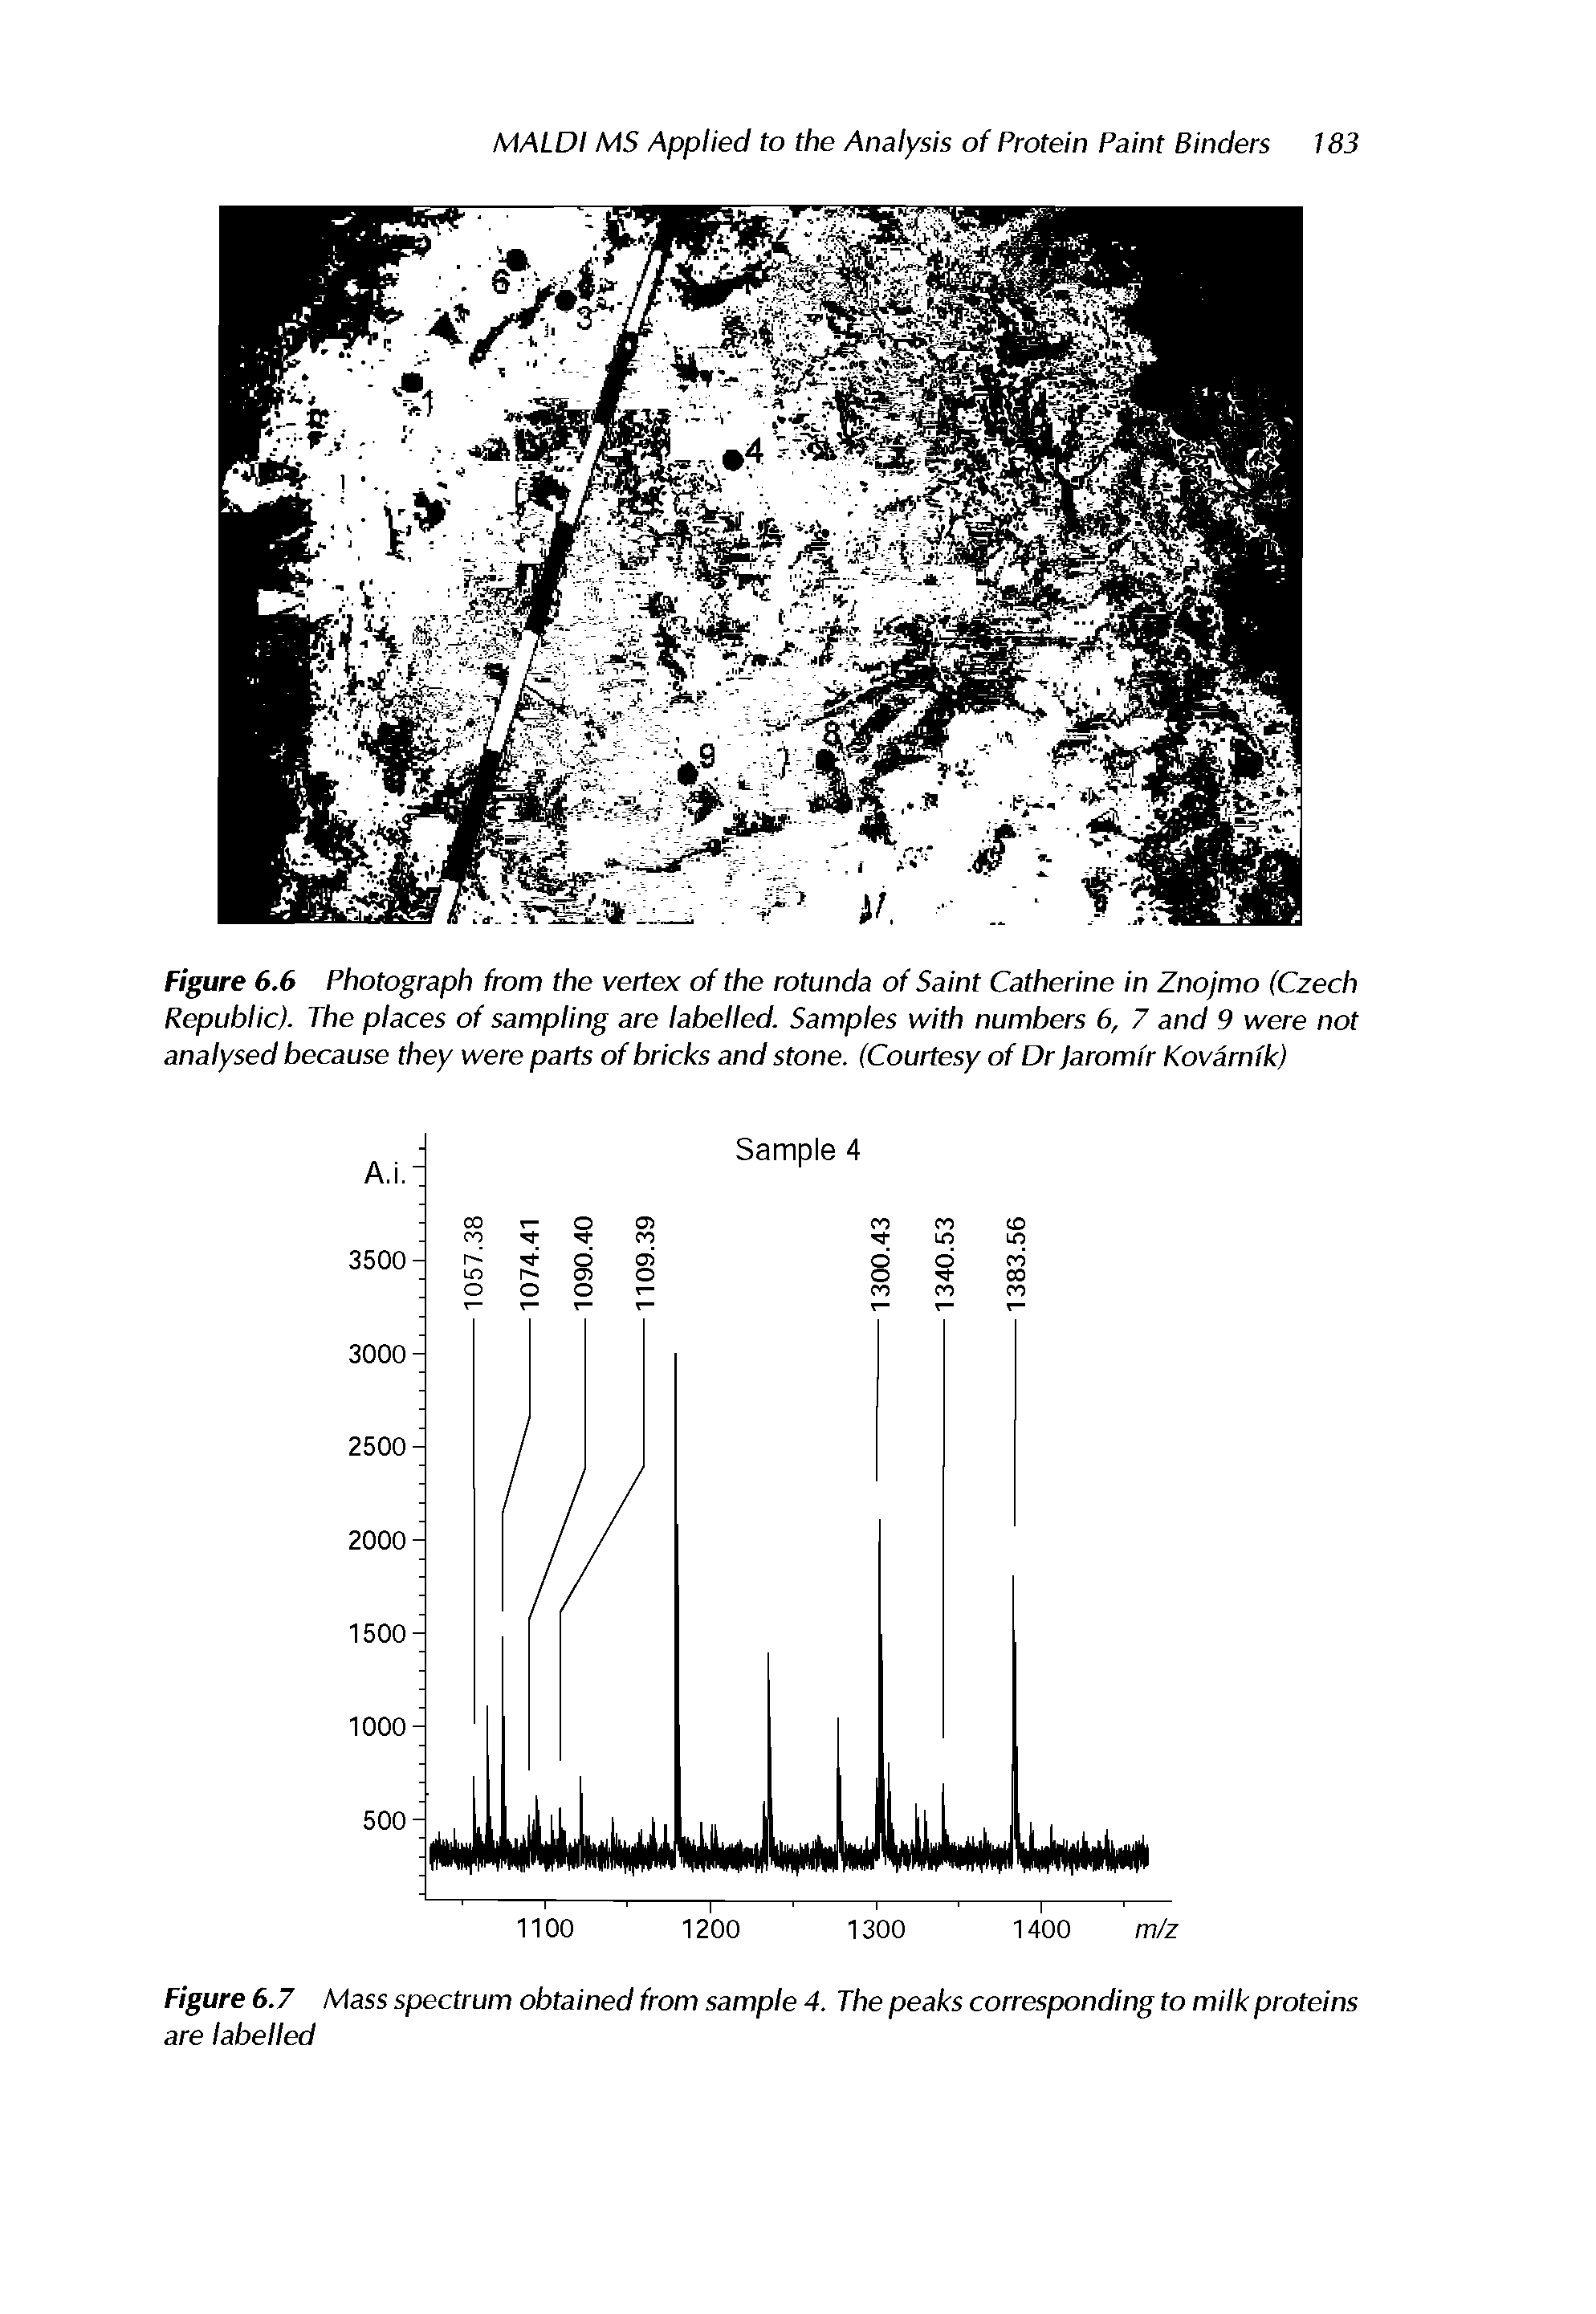 Figure 6.7 Mass spectrum obtained from sample 4. The peaks corresponding to milk proteins are labelled...